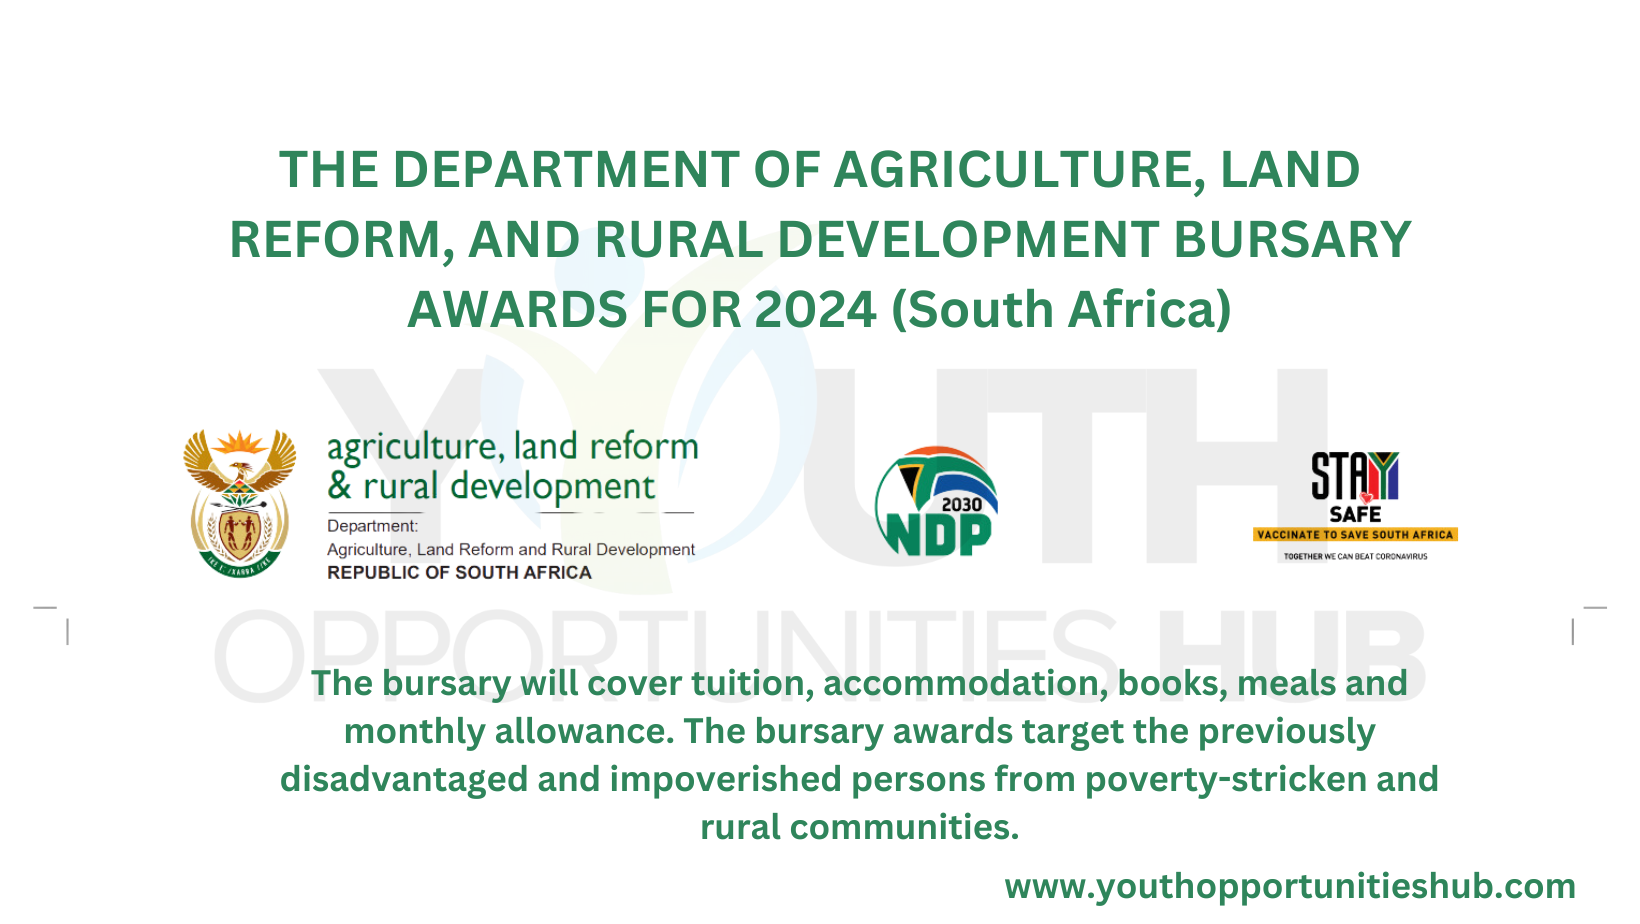 THE DEPARTMENT OF AGRICULTURE, LAND REFORM, AND RURAL DEVELOPMENT